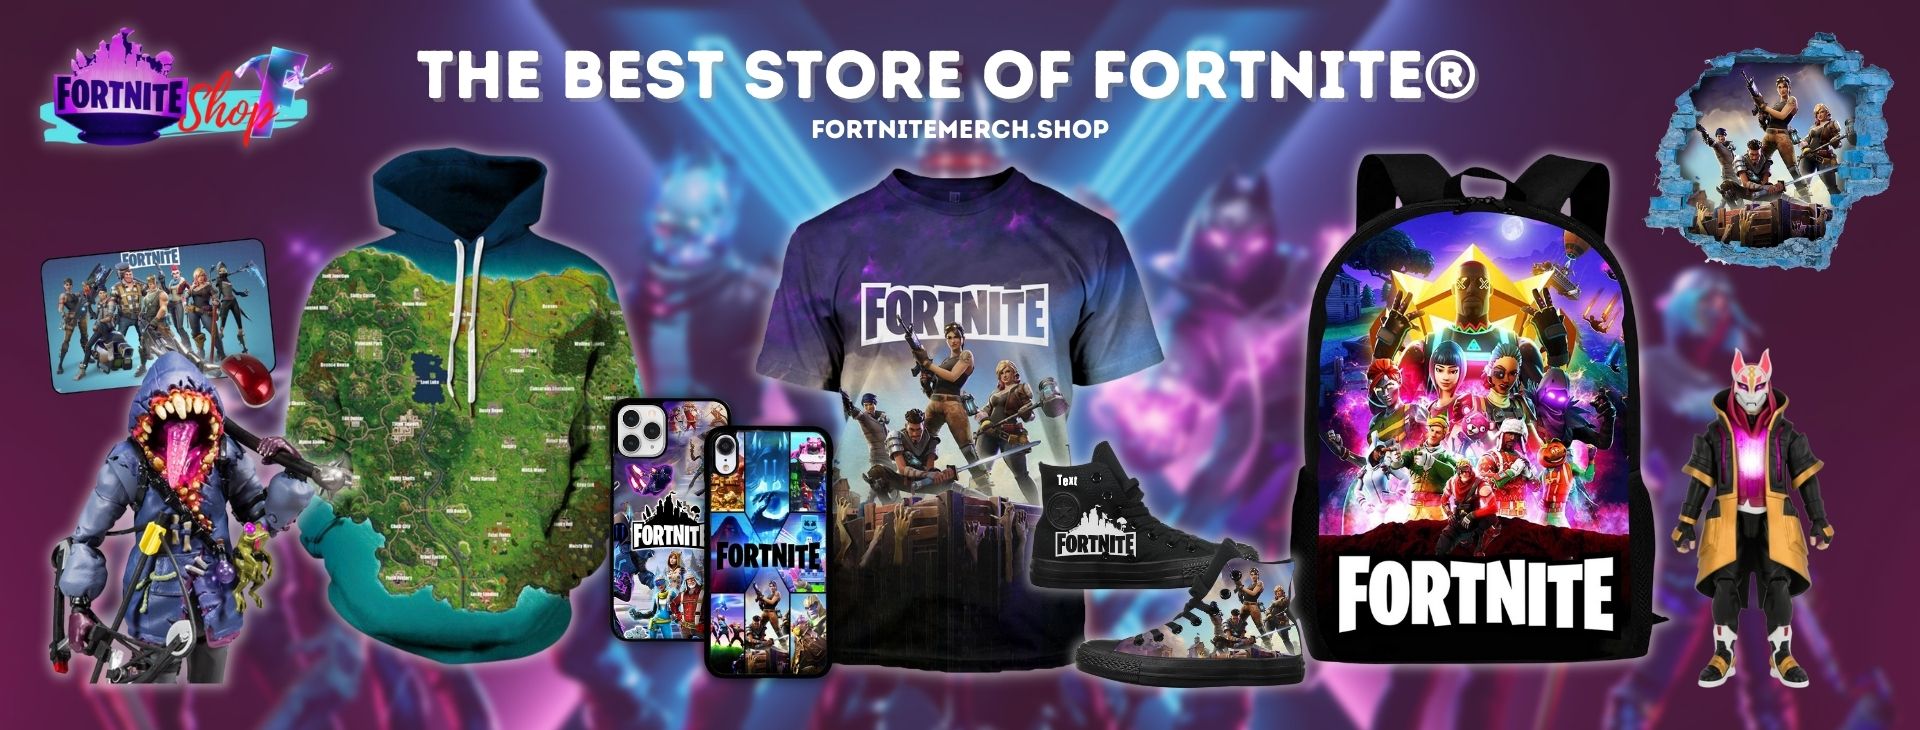 Fortnite Merch: Show Your Love for the Game with These Must-Have Items